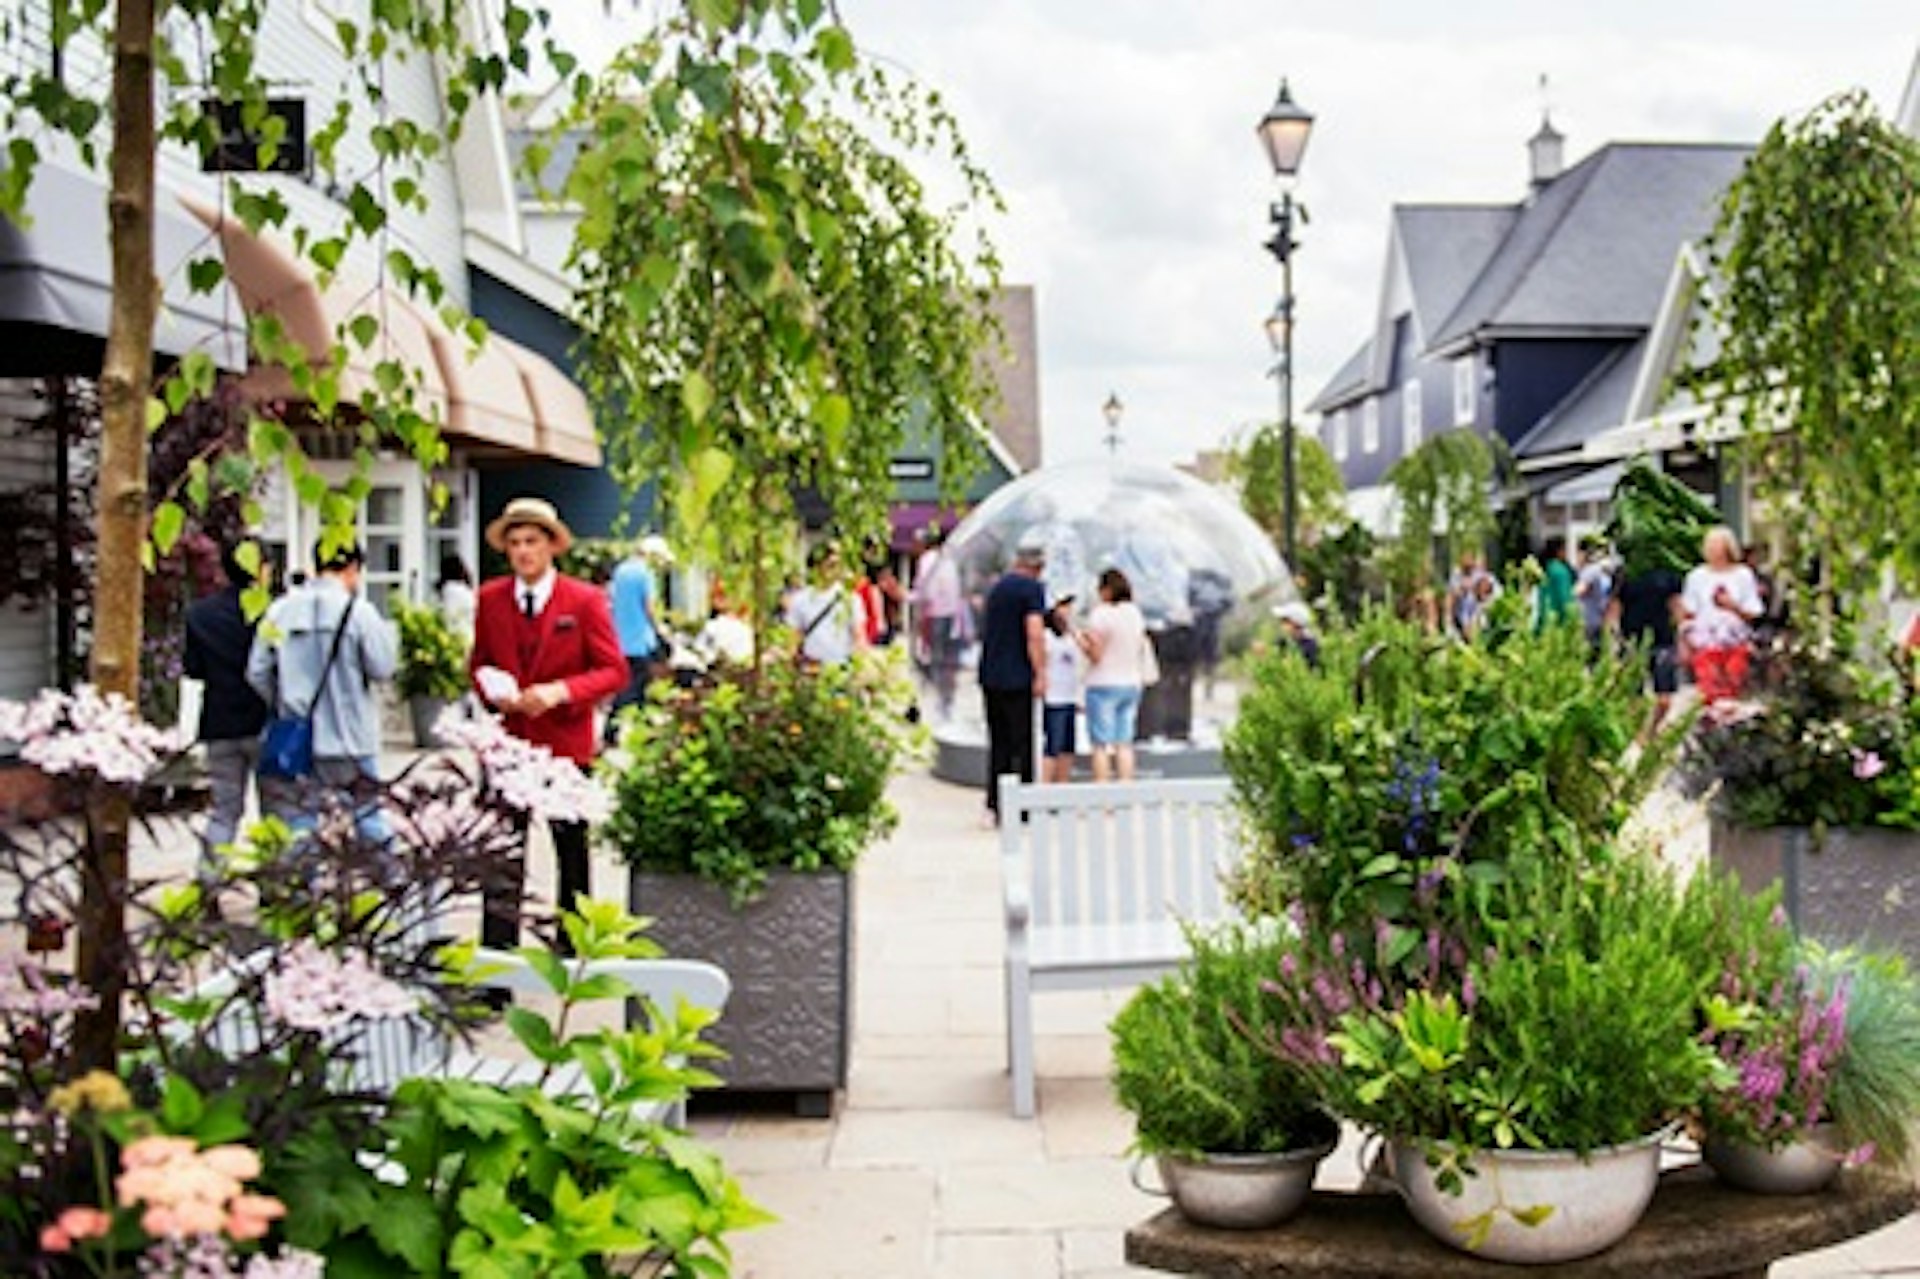 Premium Designer Shopping Experience with Lunch at Bicester Village 3